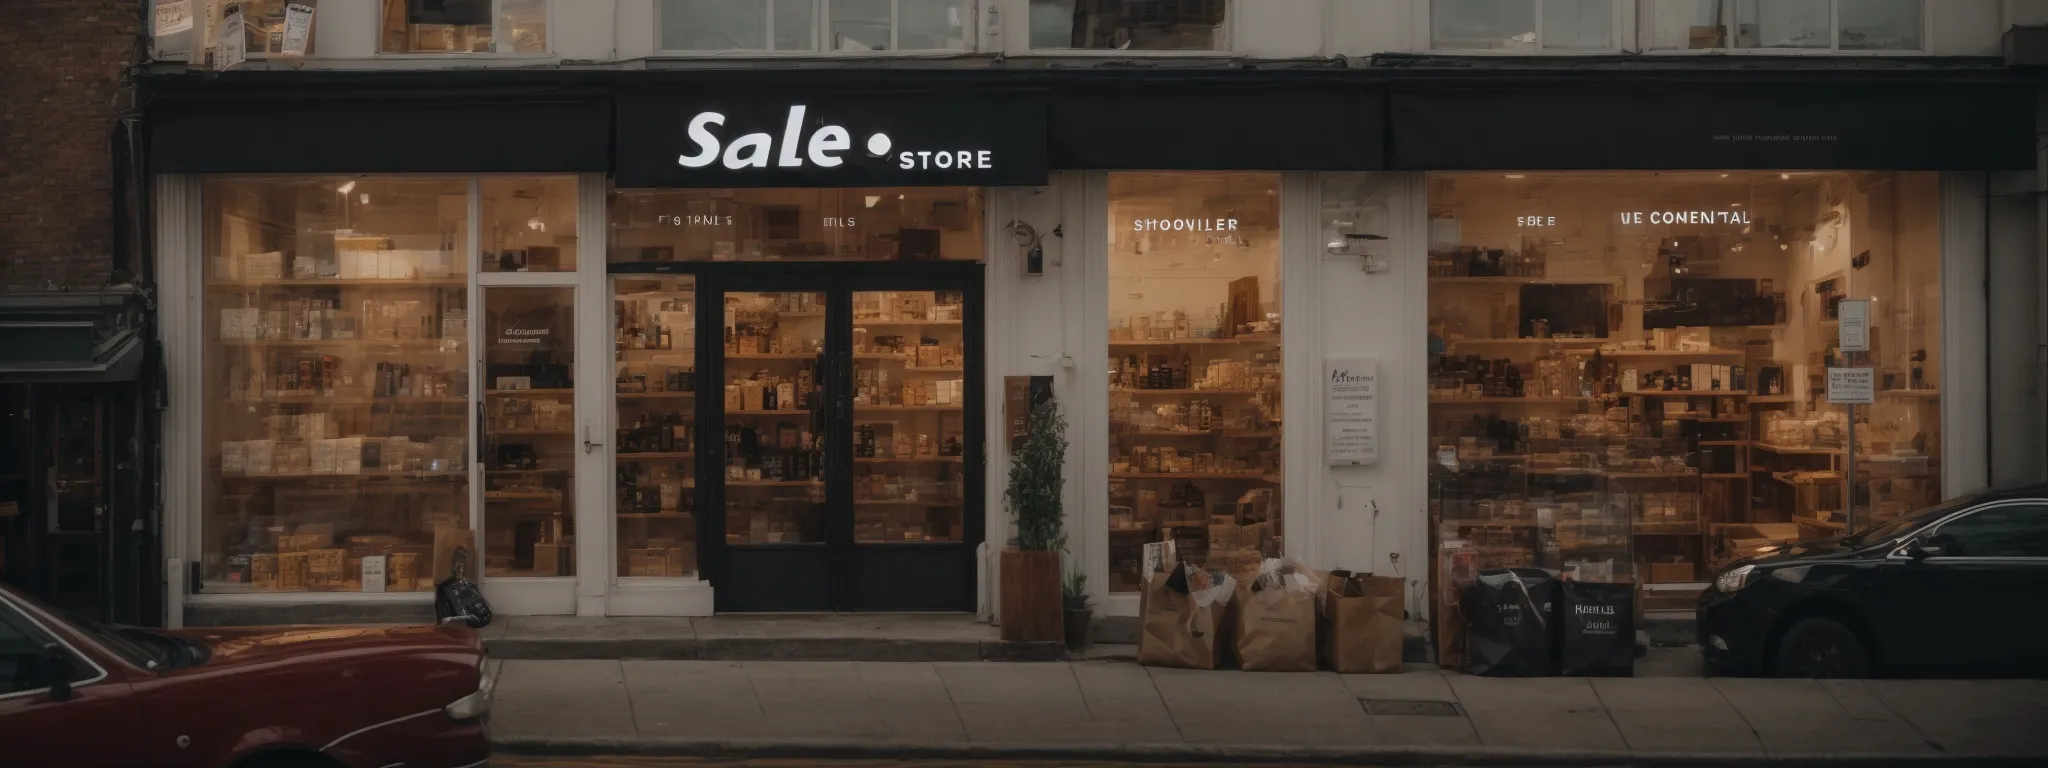 a bustling ecommerce storefront with a visible 'sale' banner and a diverse array of products on display.